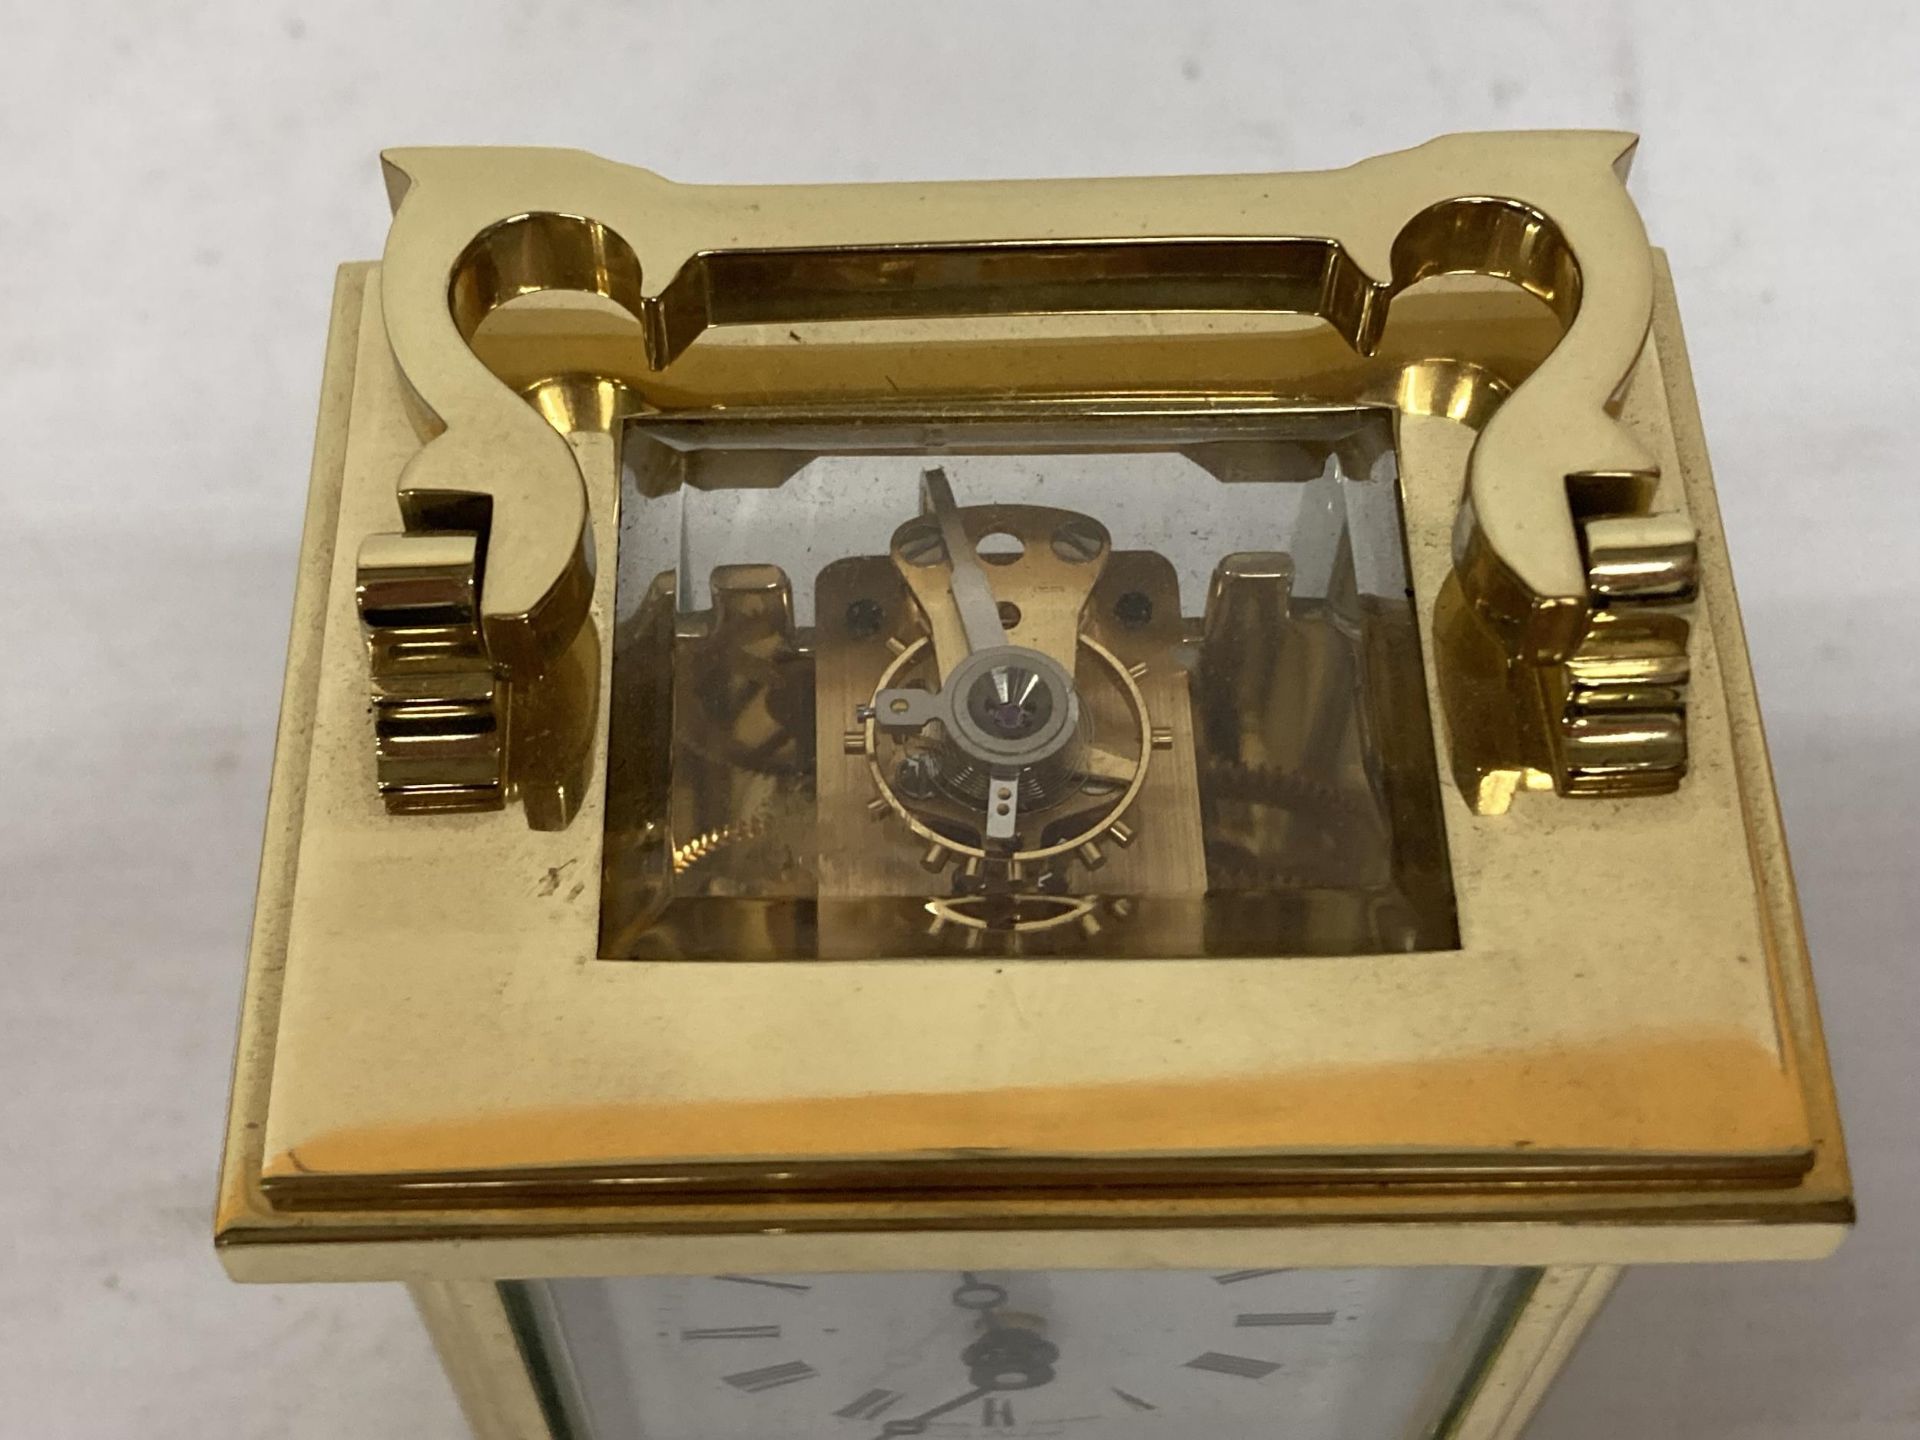 A WATCHES OF SWITZERLAND BRASS CARRIAGE CLOCK - Image 4 of 4